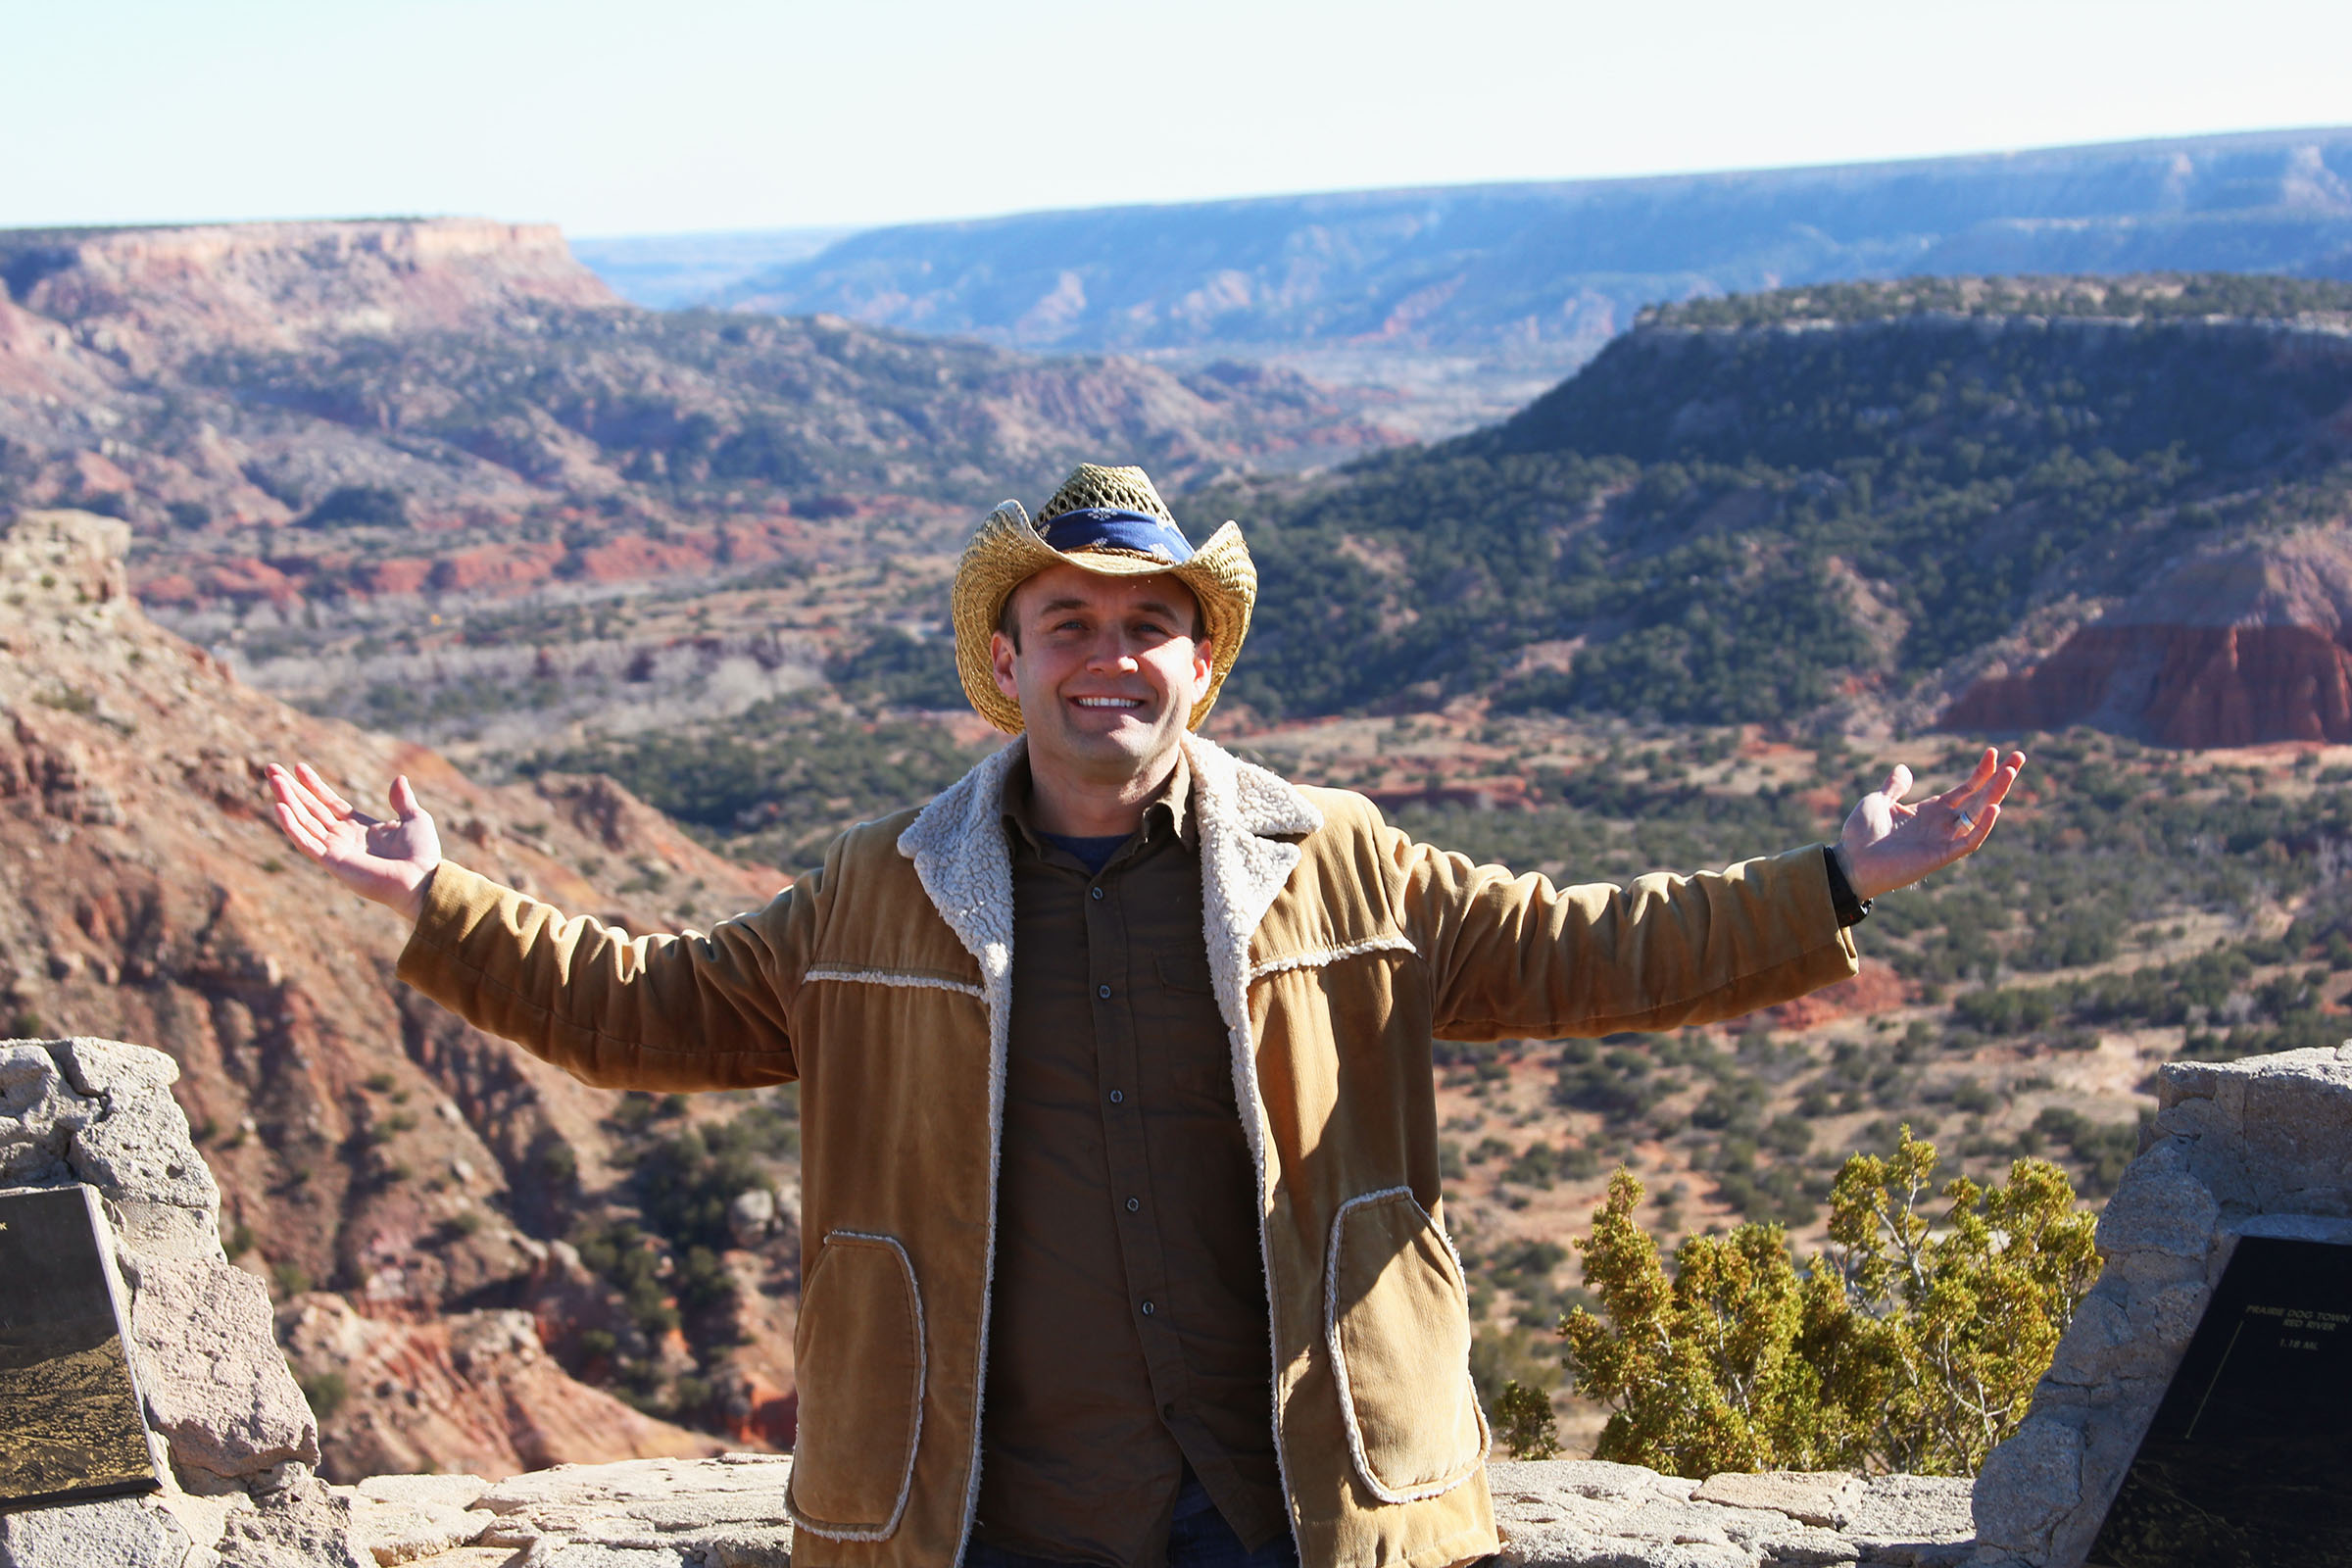 A picture of a man wearing a tan jacket holding his arms up in the air, in front of a large expanse of canyonlands